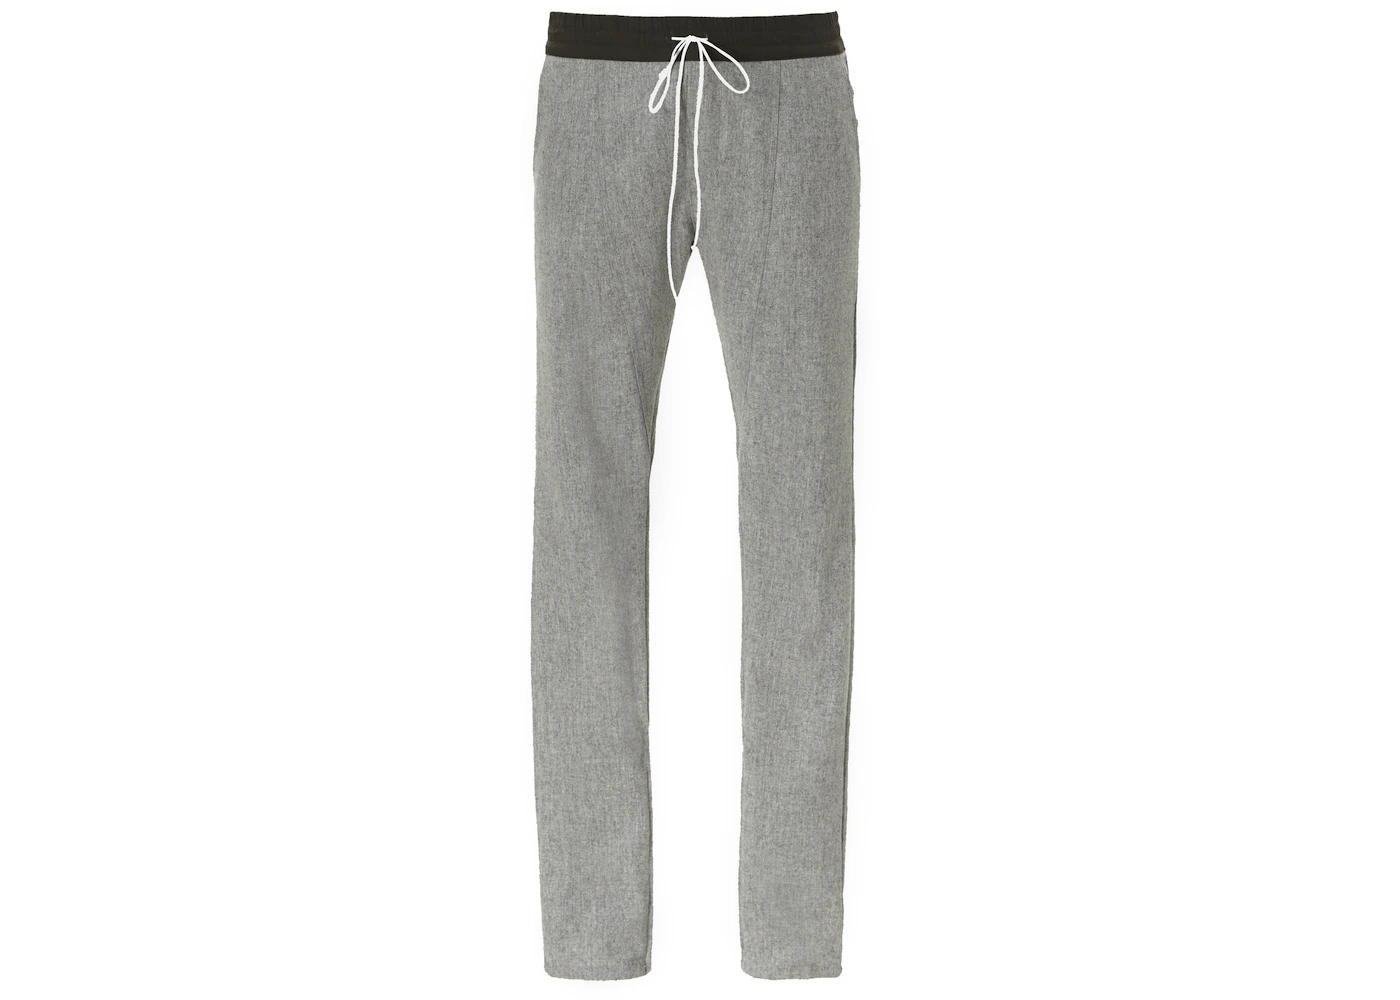 FEAR OF GOD Wool Trouser Grey Men's - Fourth Collection - US